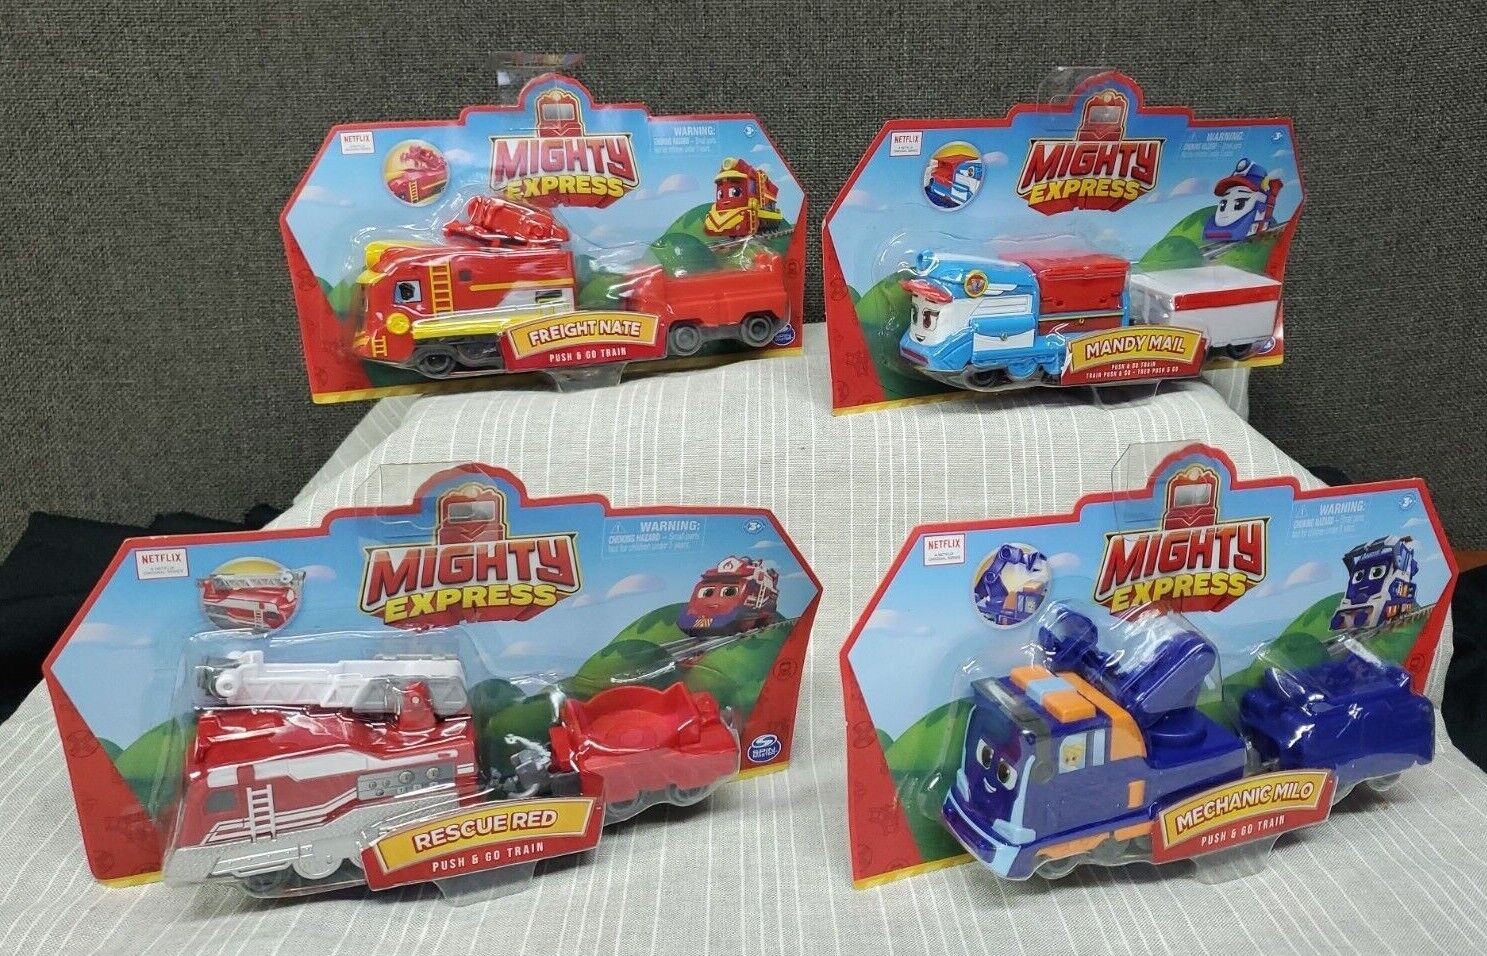 Mighty Express FREIGHT NATE Push & Go Red Train Netflix Series Toy